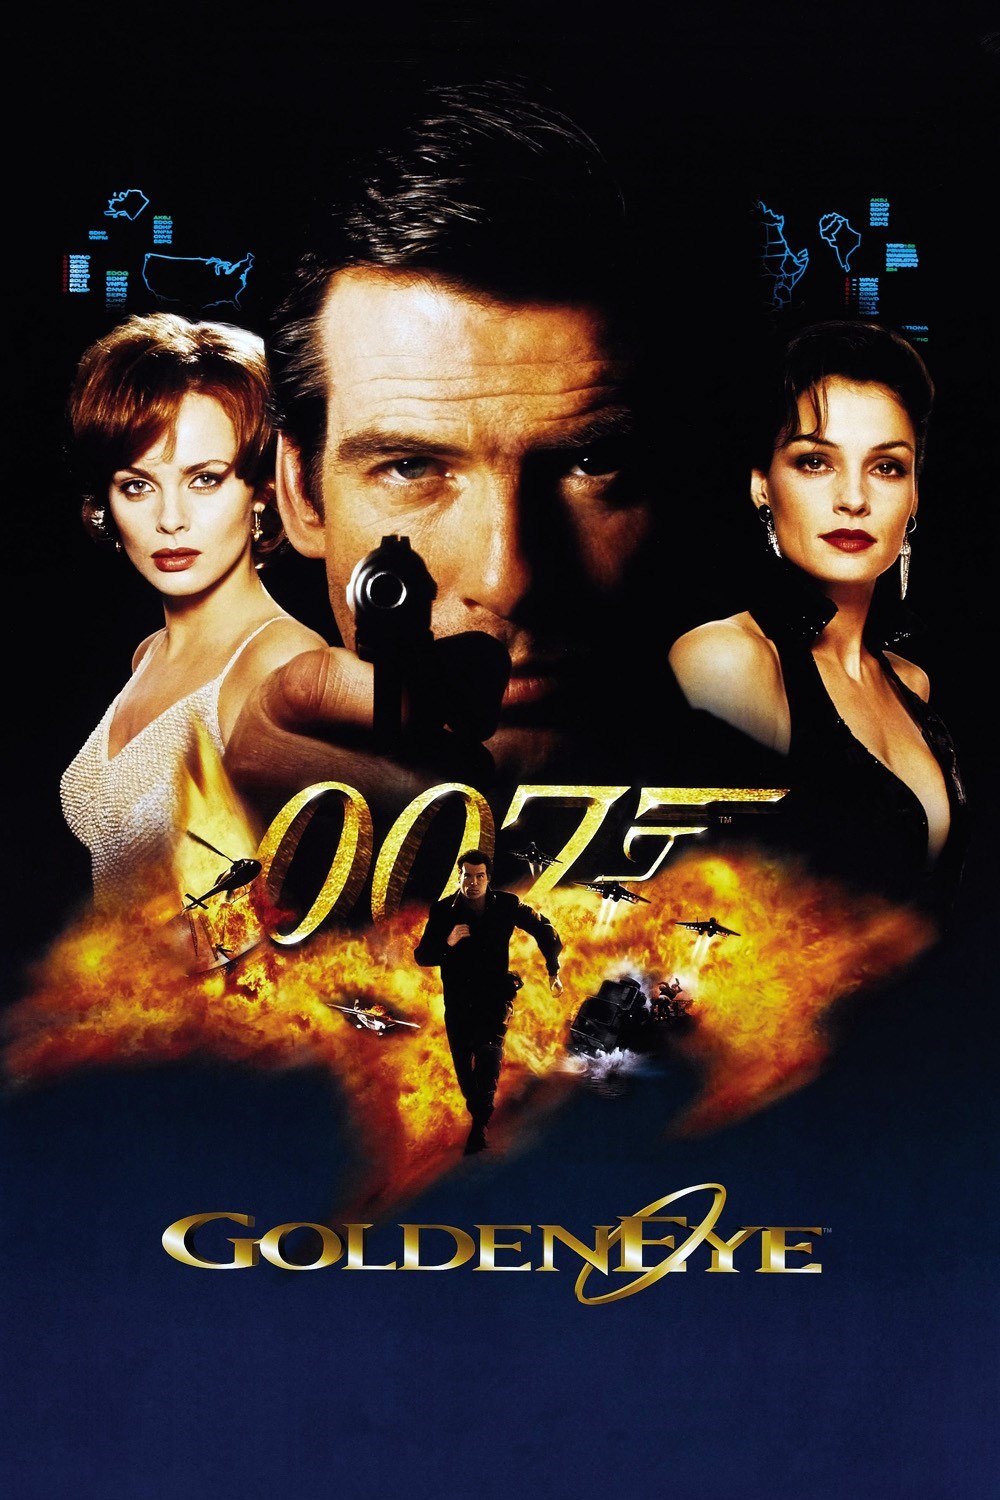 The Making of 'GoldenEye': A Video Journal